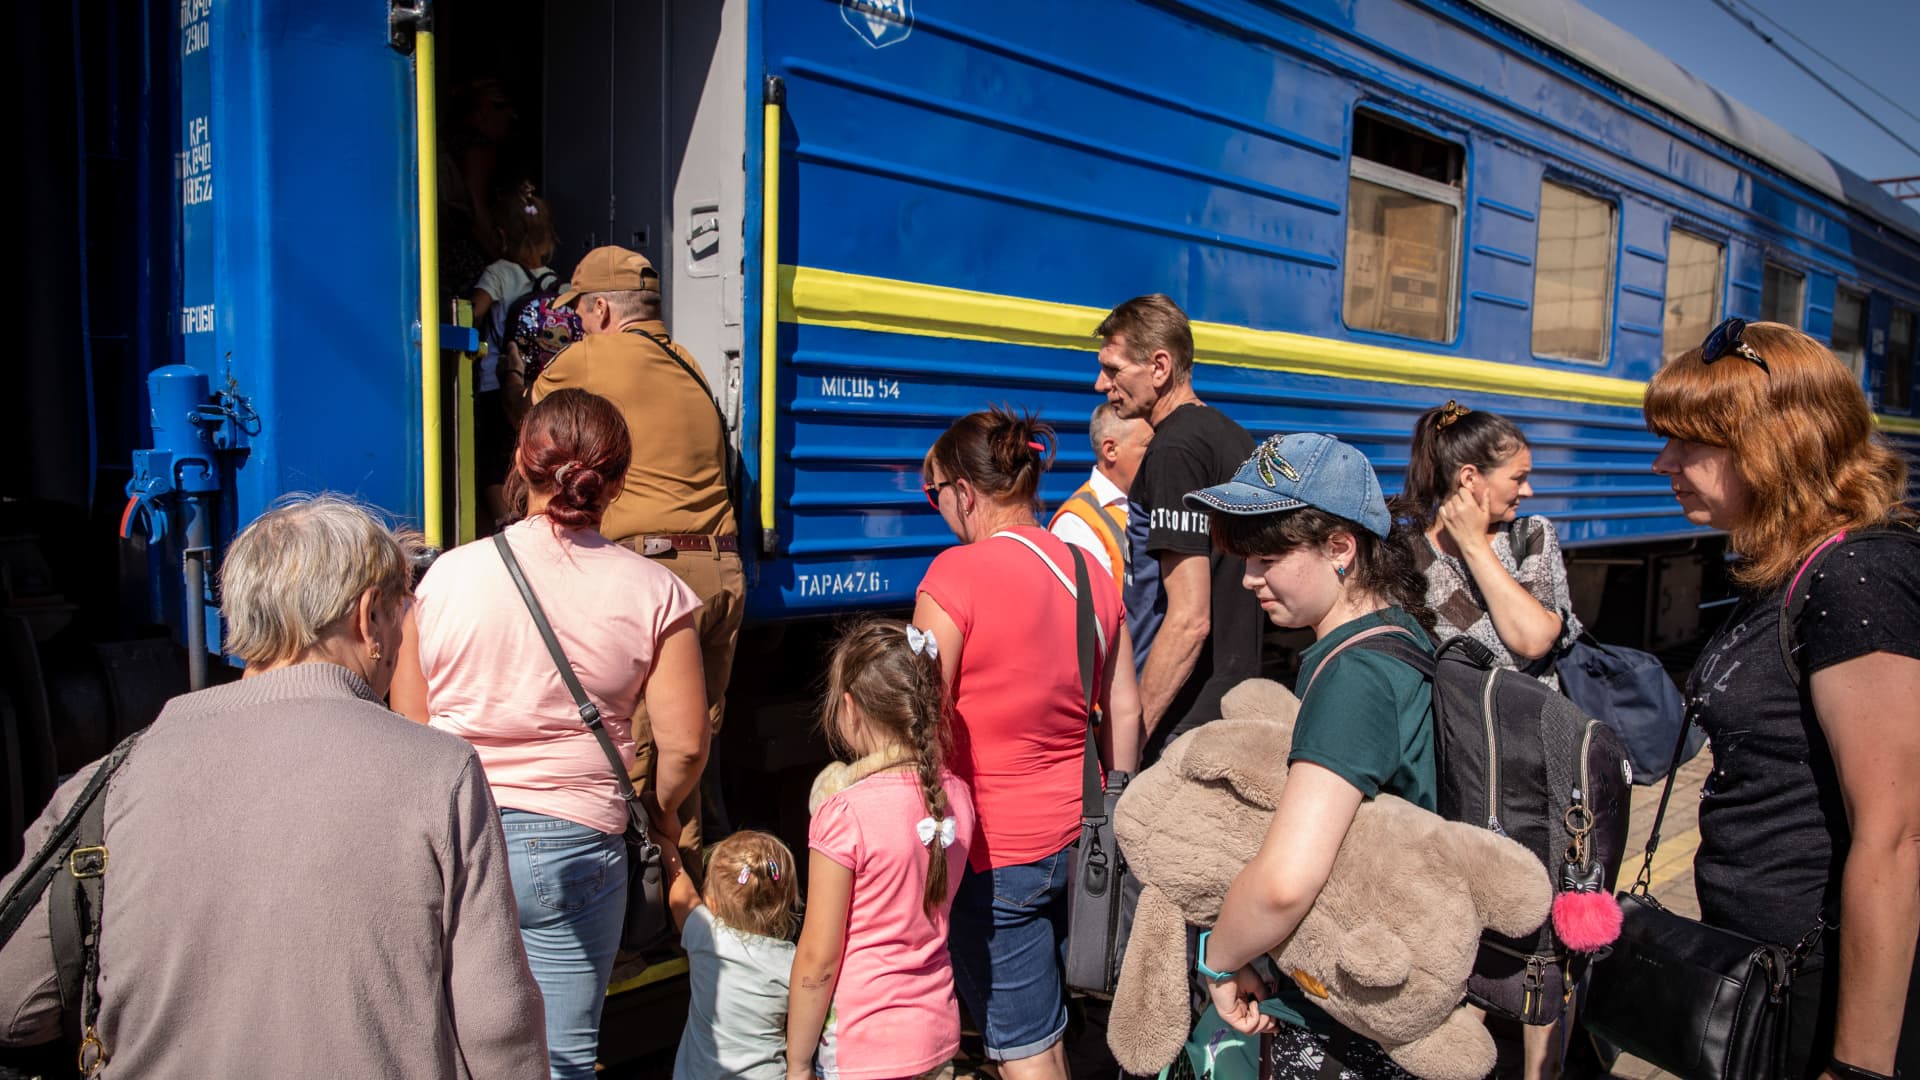 Civilians board the evacuation train in Pokorvsk, amid the intensified fighting in the Eastern part of Ukraine.